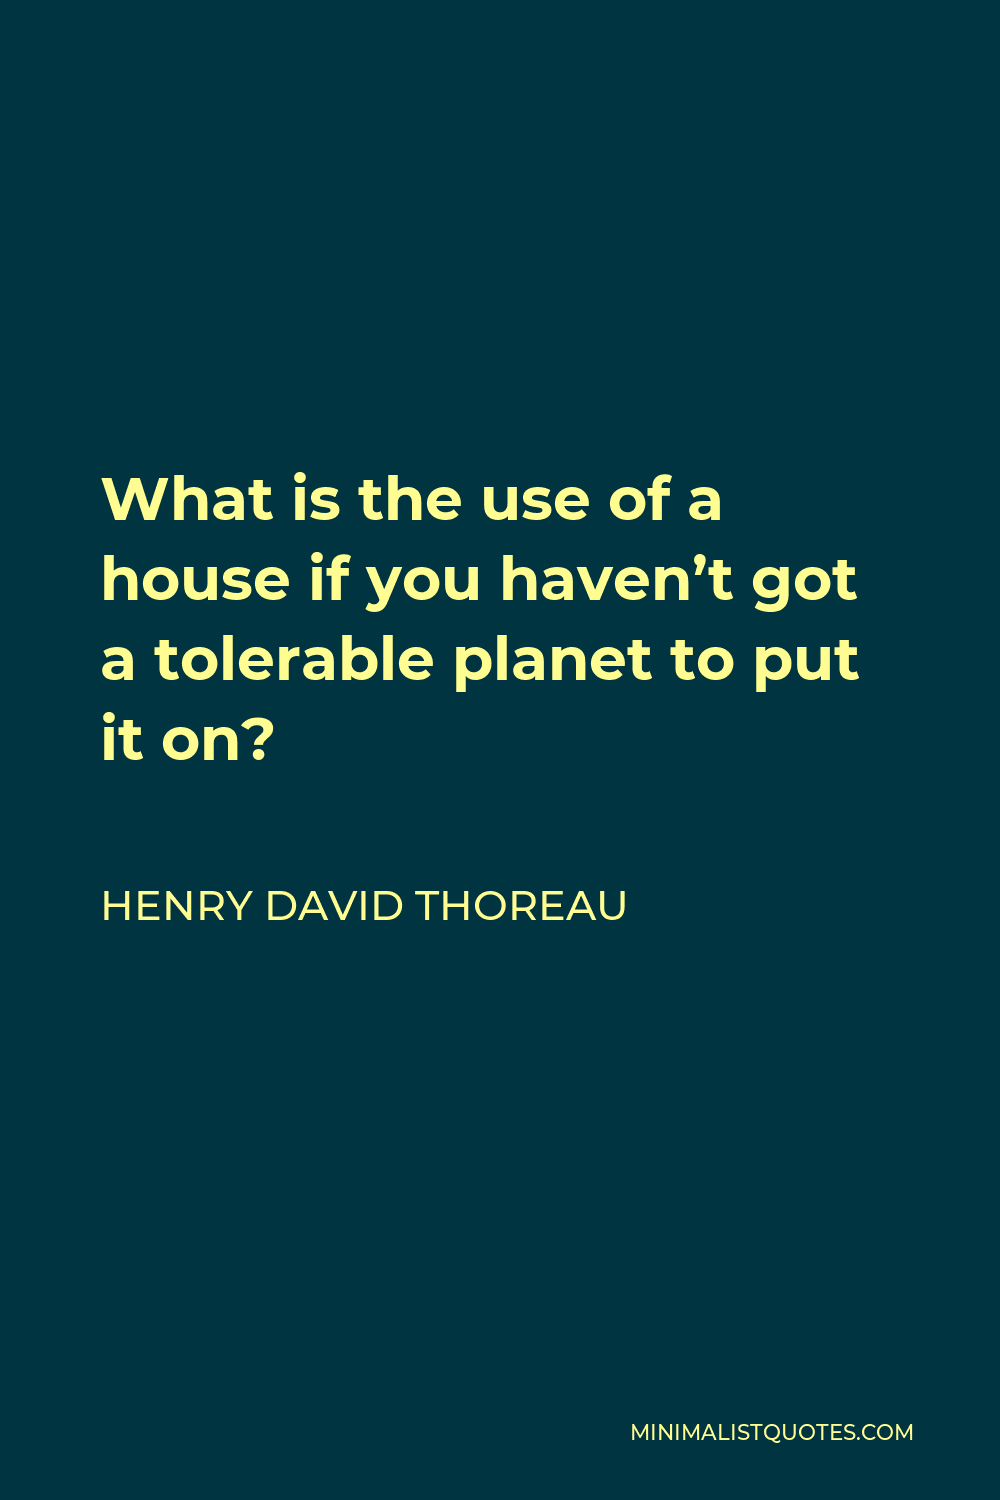 Henry David Thoreau Quote - What is the use of a house if you haven’t got a tolerable planet to put it on?